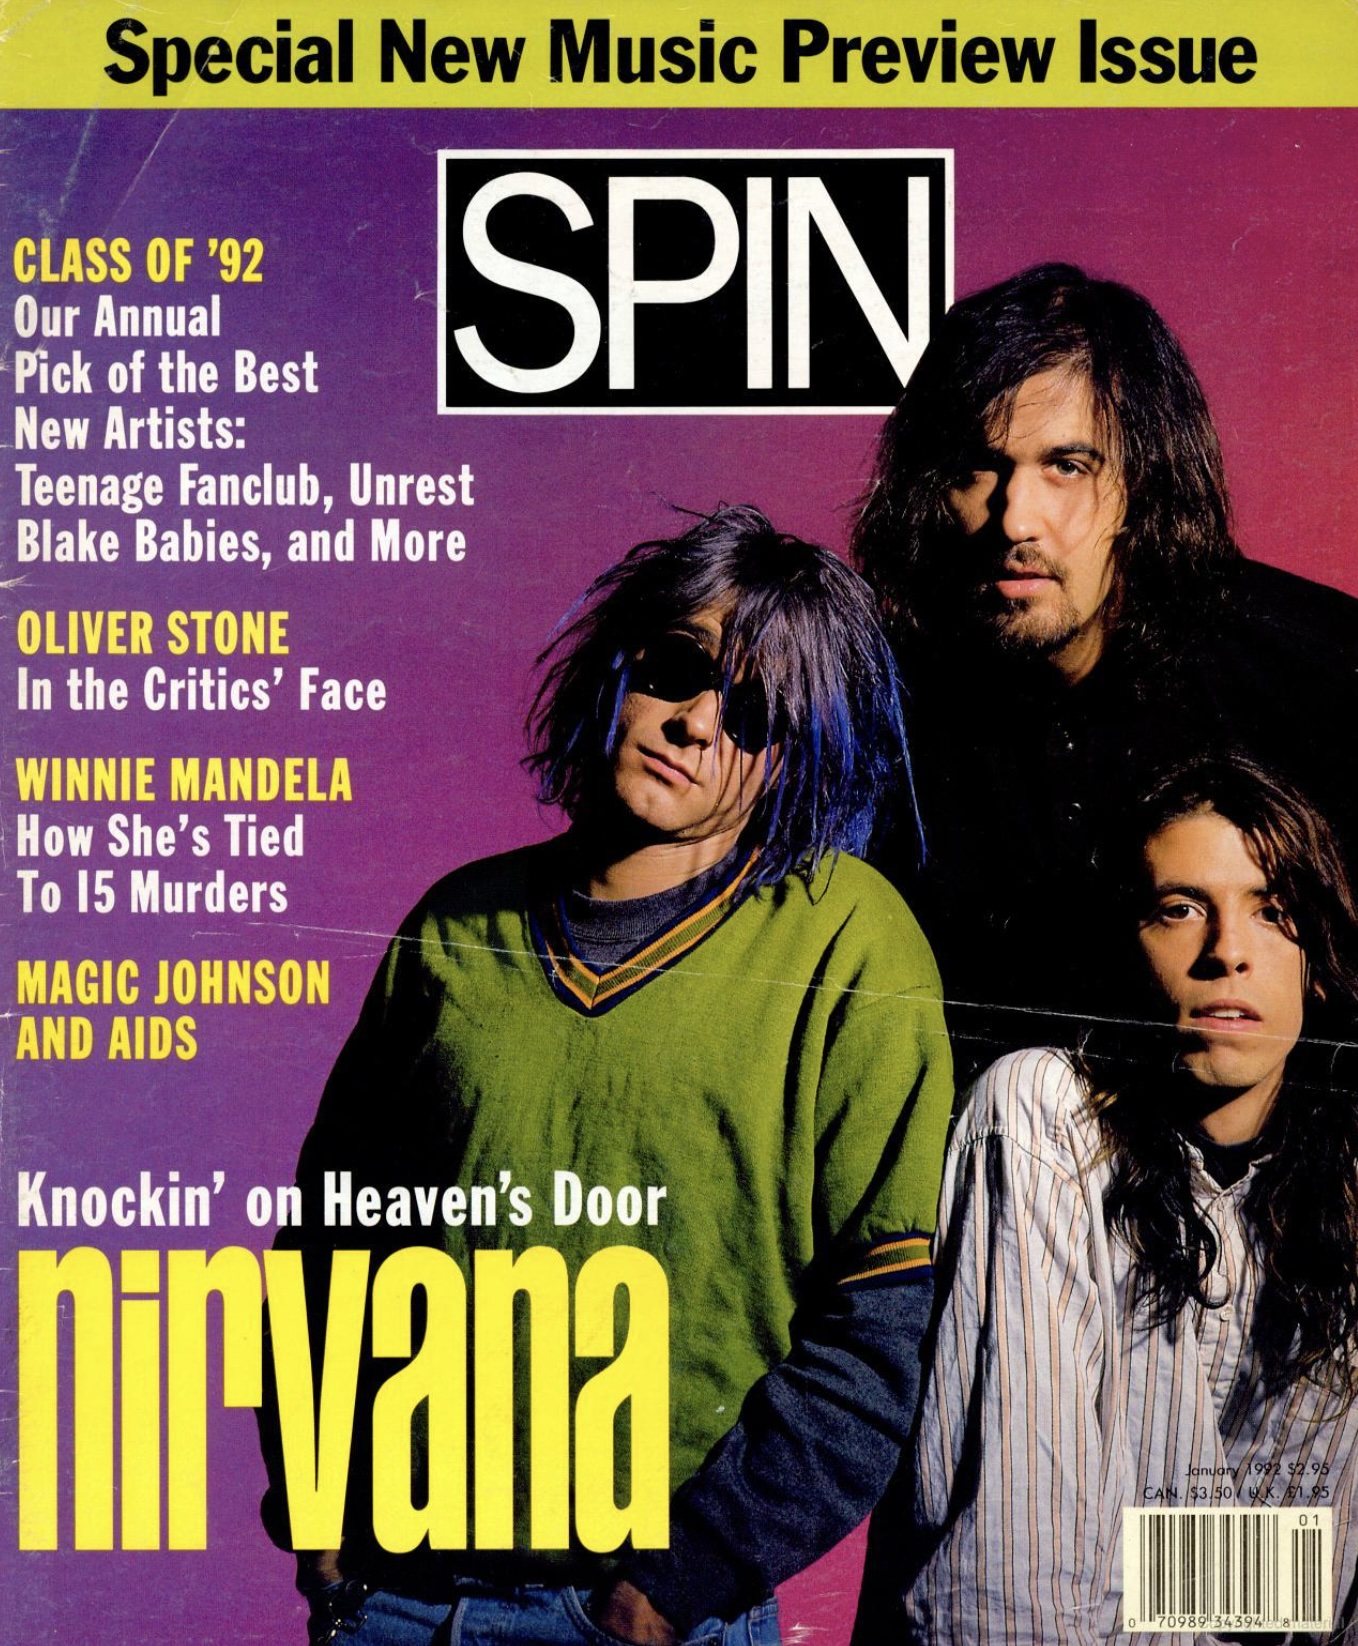 Spin Magazine Jan 1992. Nirvana is on the cover